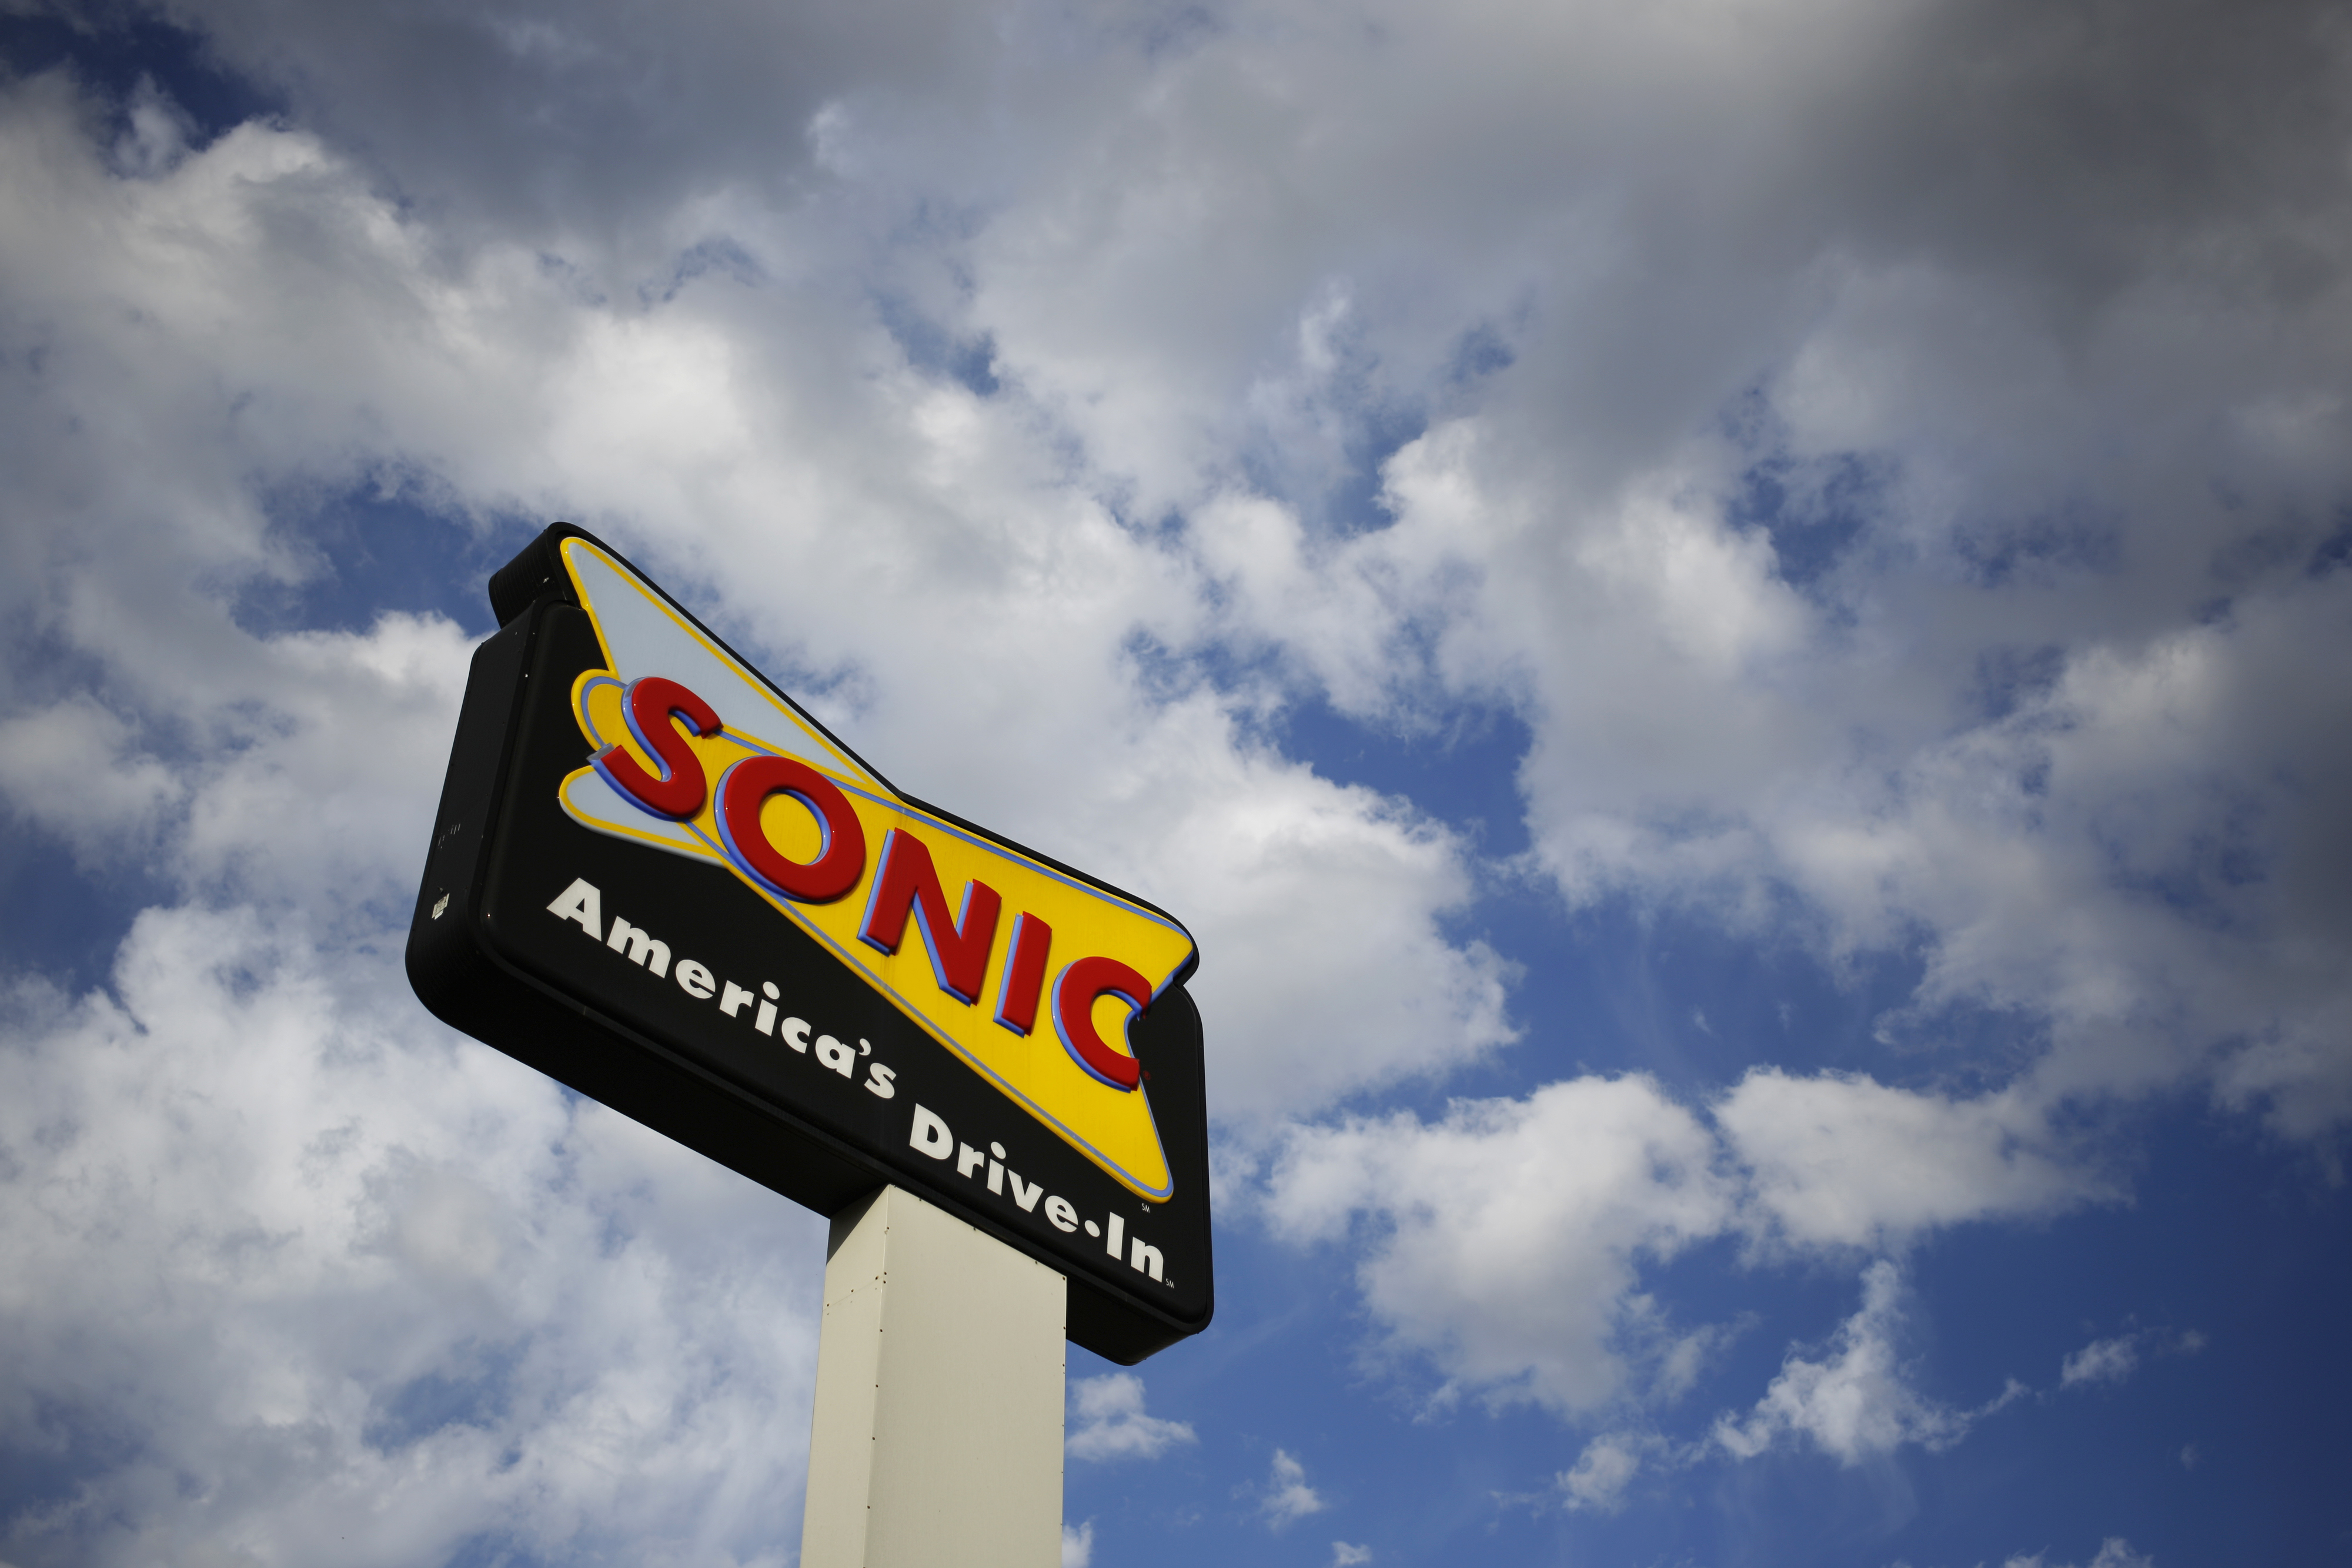 Sonic Drive-In Hack: What to Do If You Think You've Been Compromised